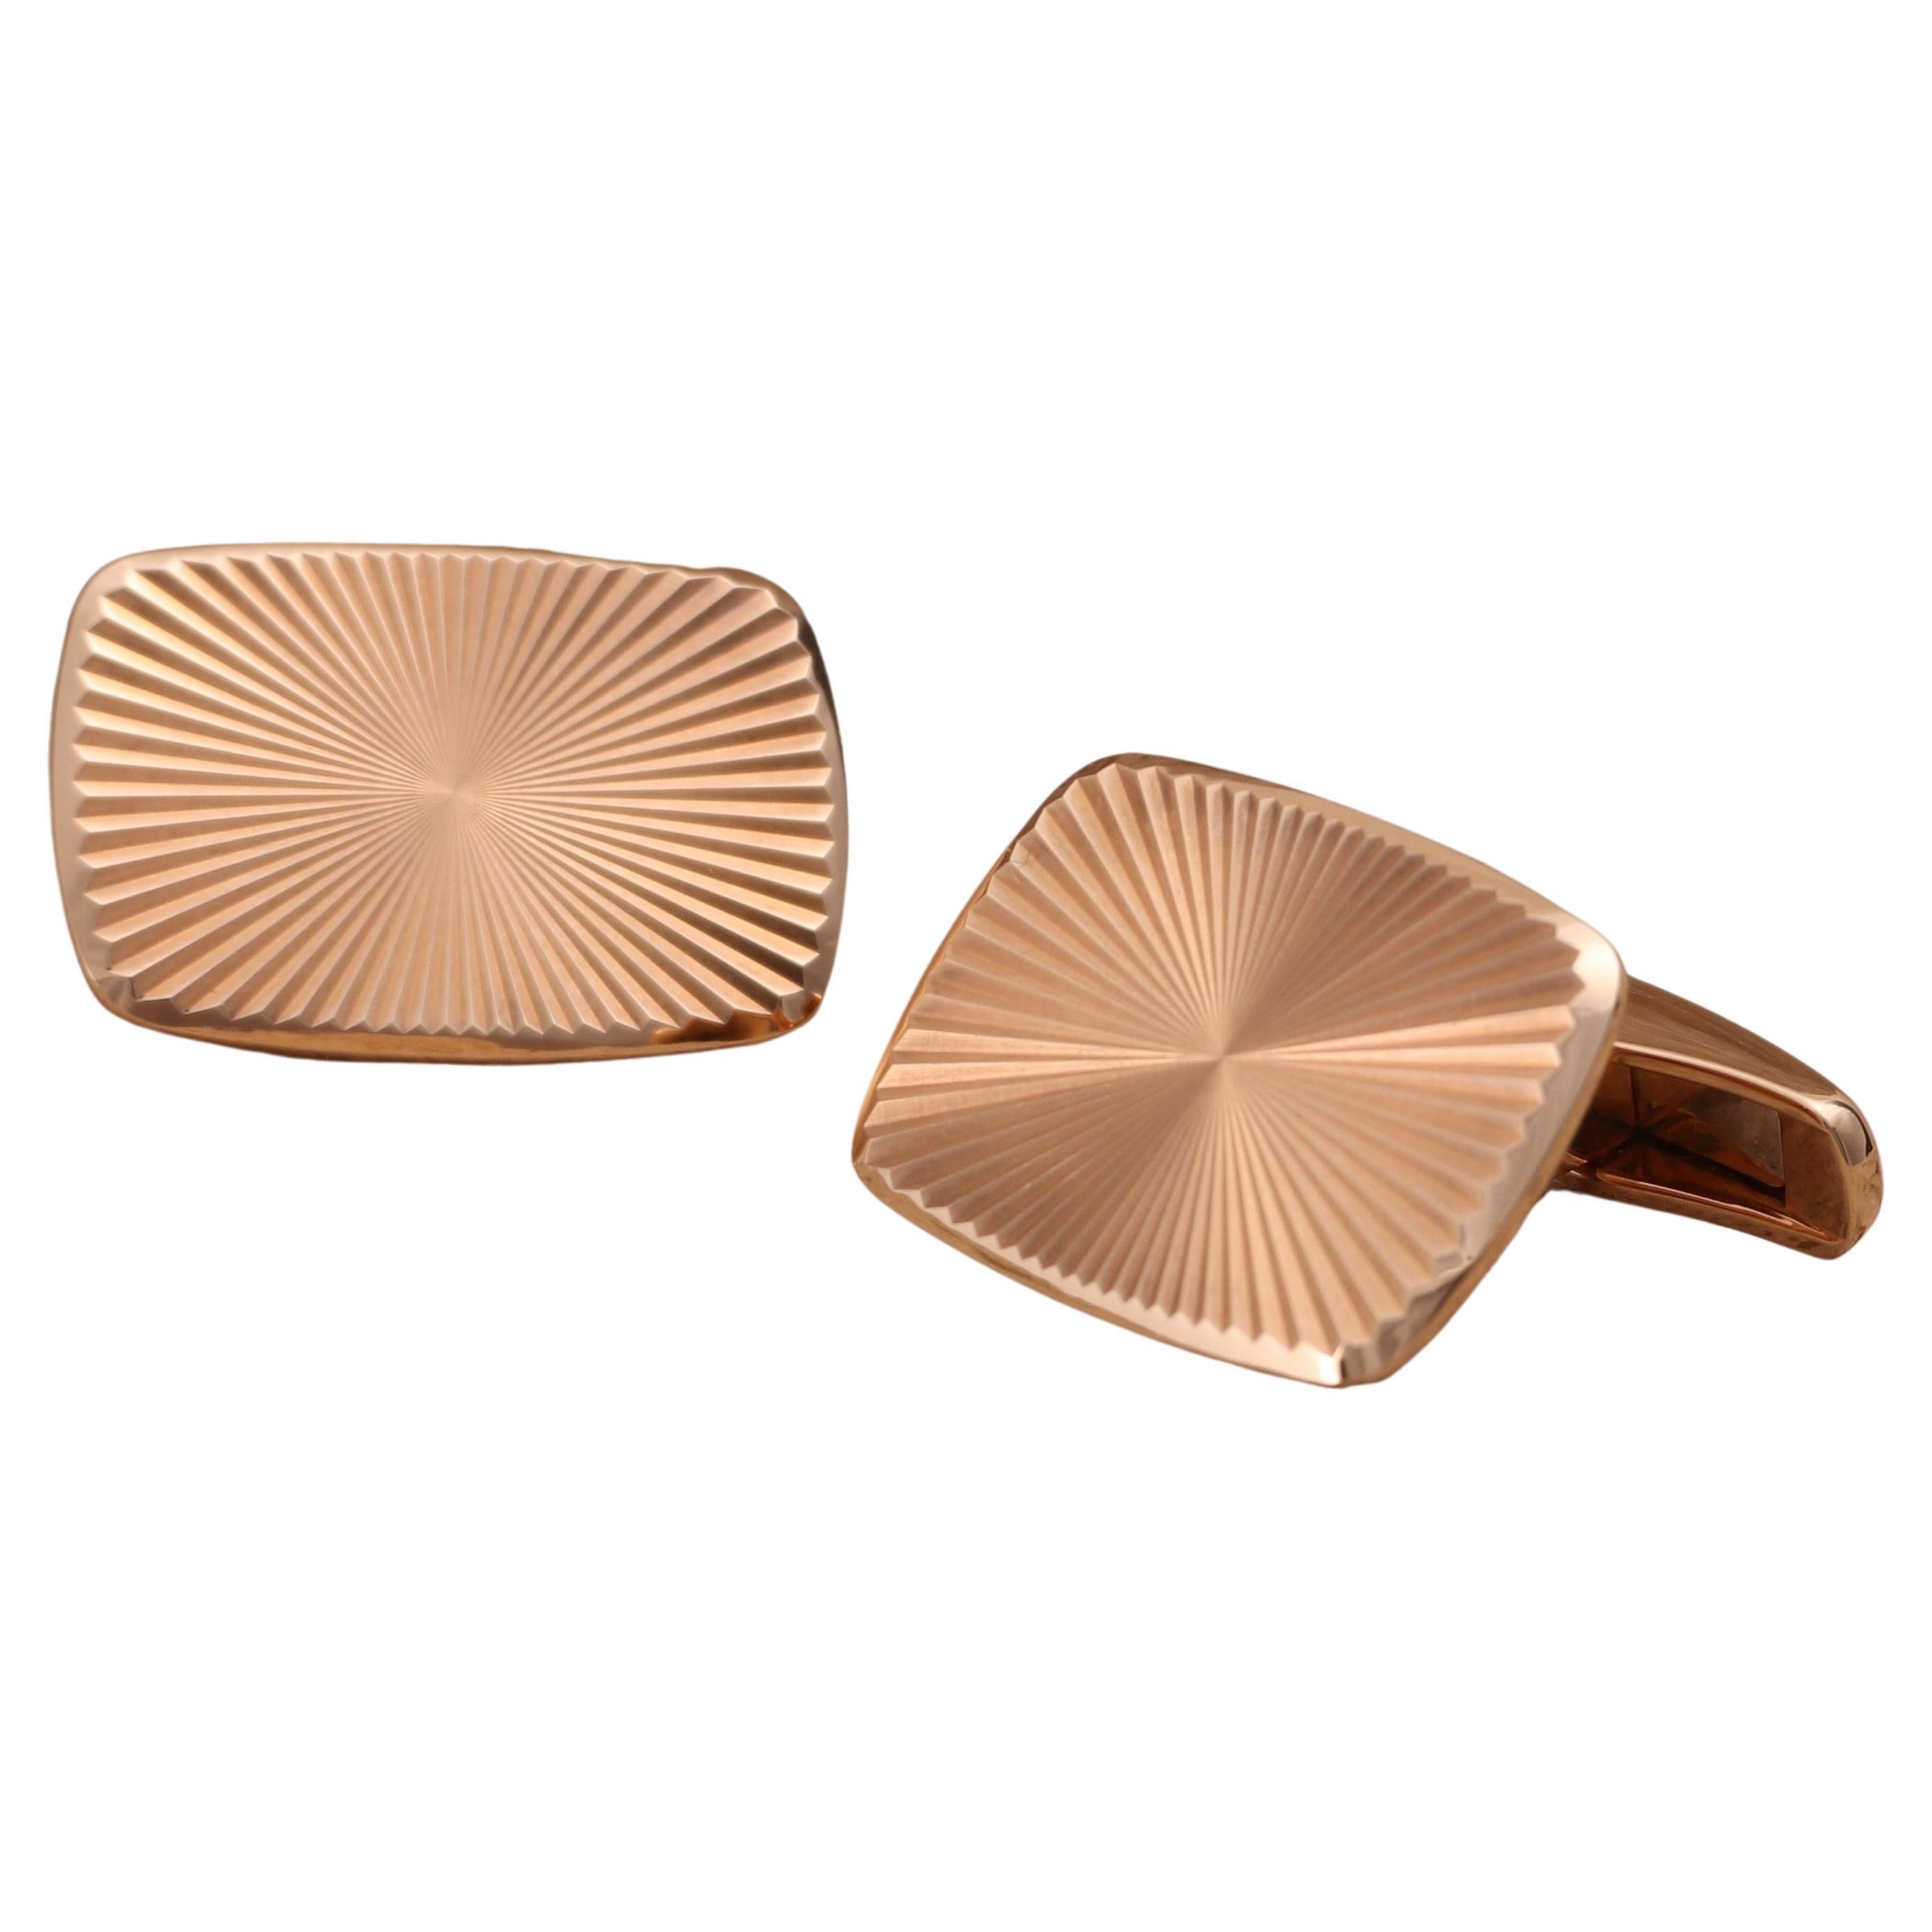 Victor Mayer Rectangular Cufflinks, Dorian Collection, 18k Rose Gold, Star Burst Guilloche

About the creator Victor Mayer
Victor Mayer is internationally renowned for elegant timeless designs and unrivalled expertise in historic craftsmanship.